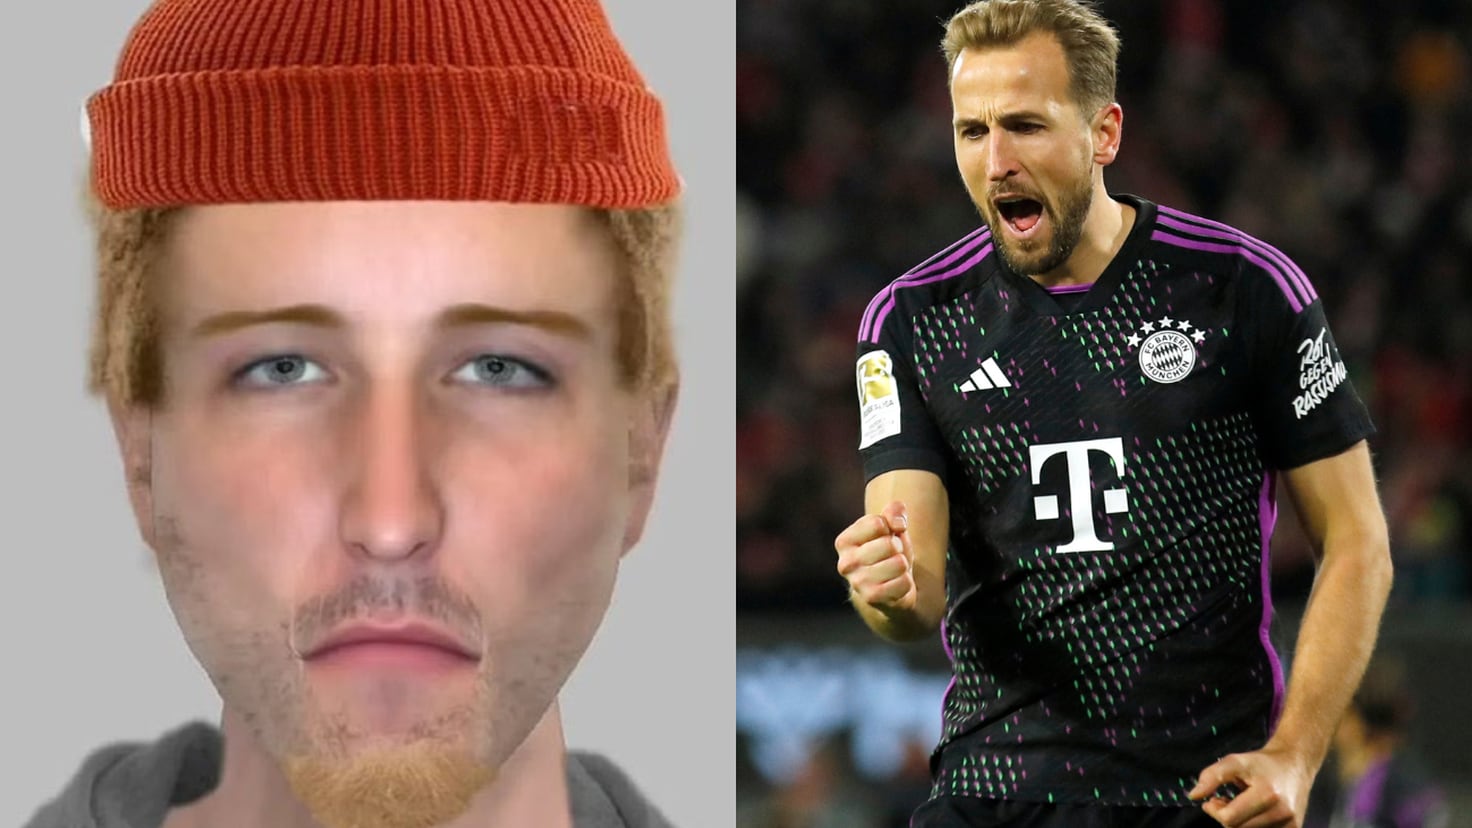 The Police are looking for Harry Kane's double for a robbery of a woman
